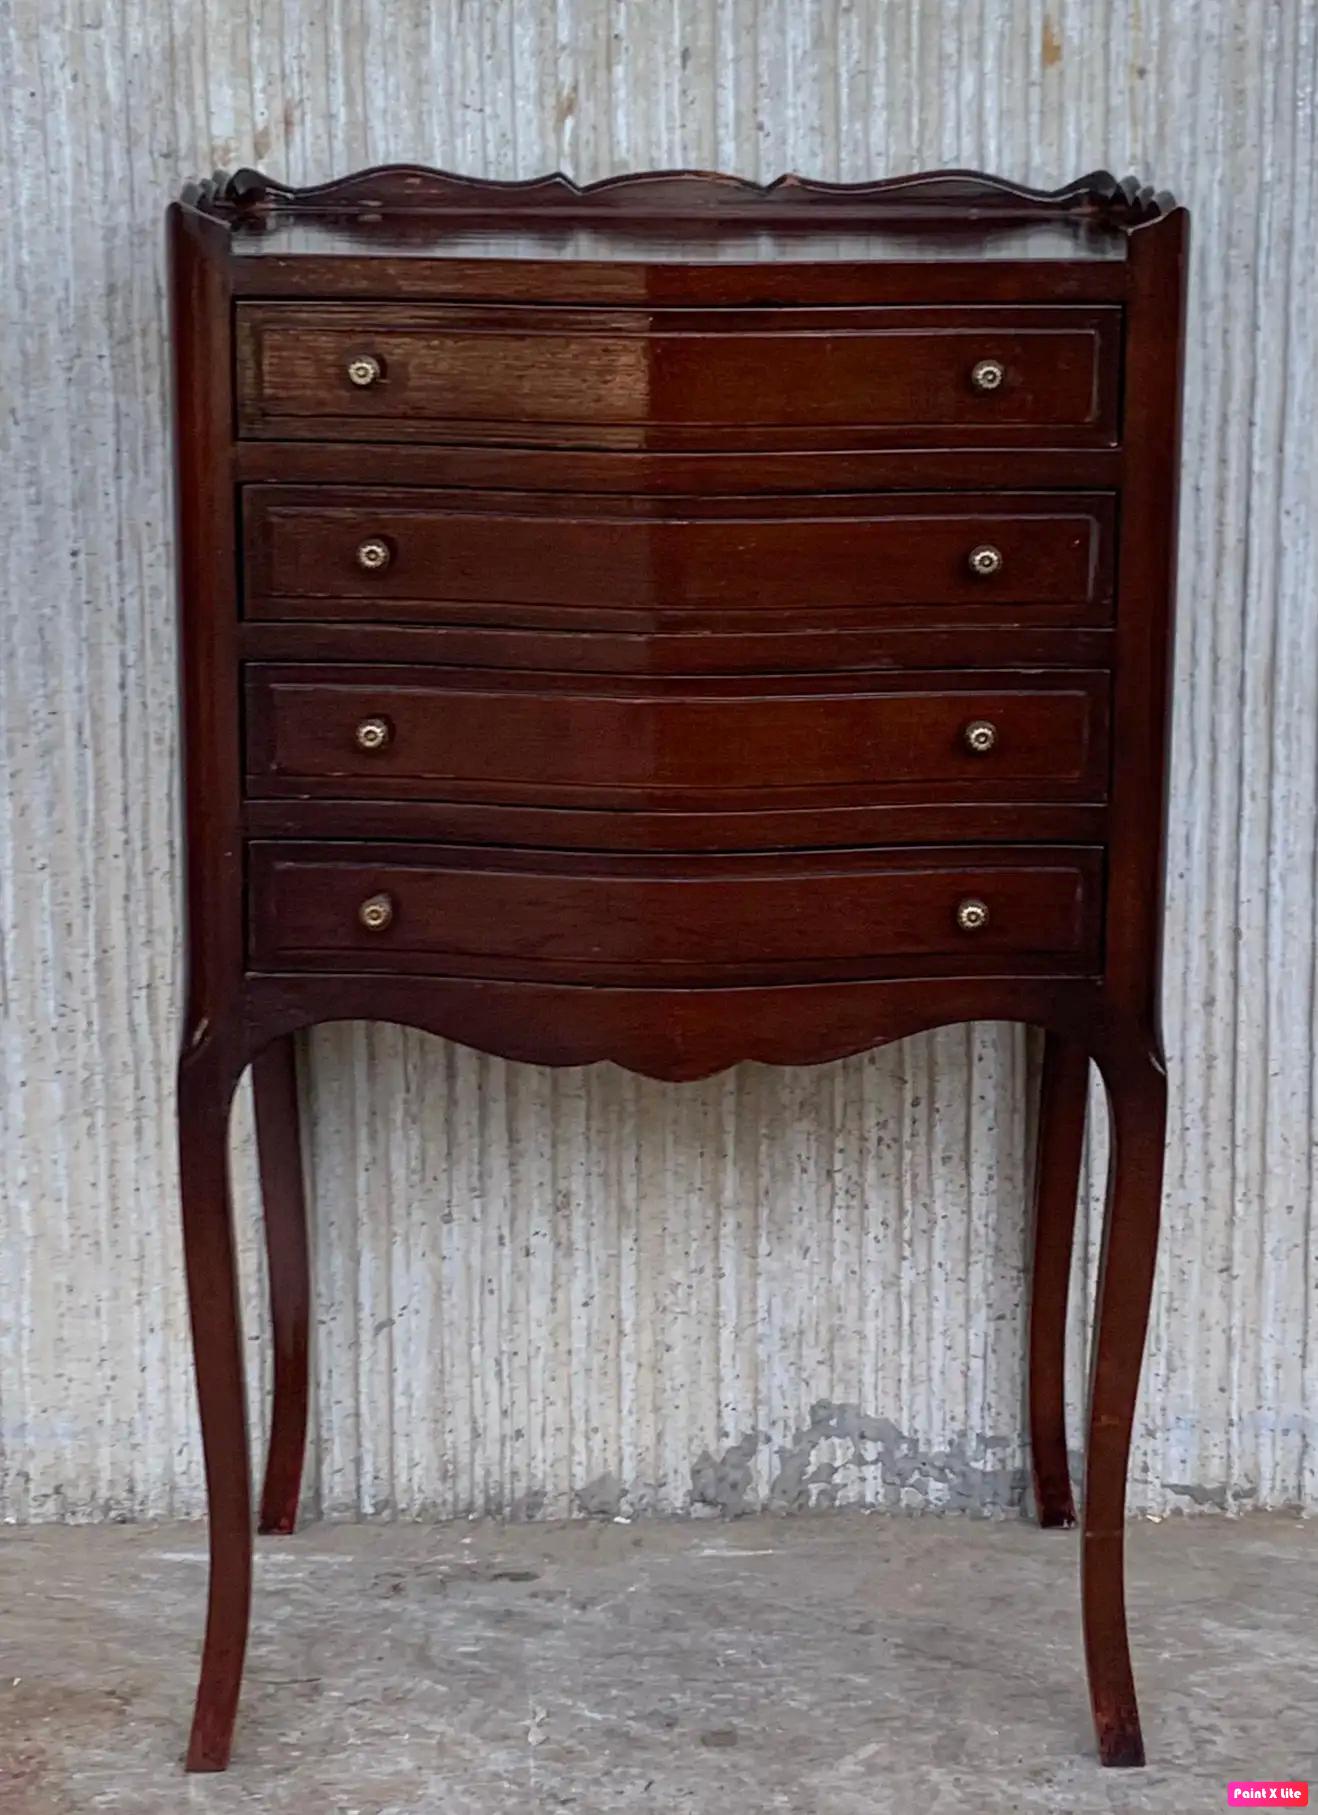 A French oak bedside table with four drawers from the late 19th century. This French 'table de chevet' features a rectangular top surrounded by a three-quarter wooden gallery, sitting above the drawers, all opening with wood pulls. The sides are